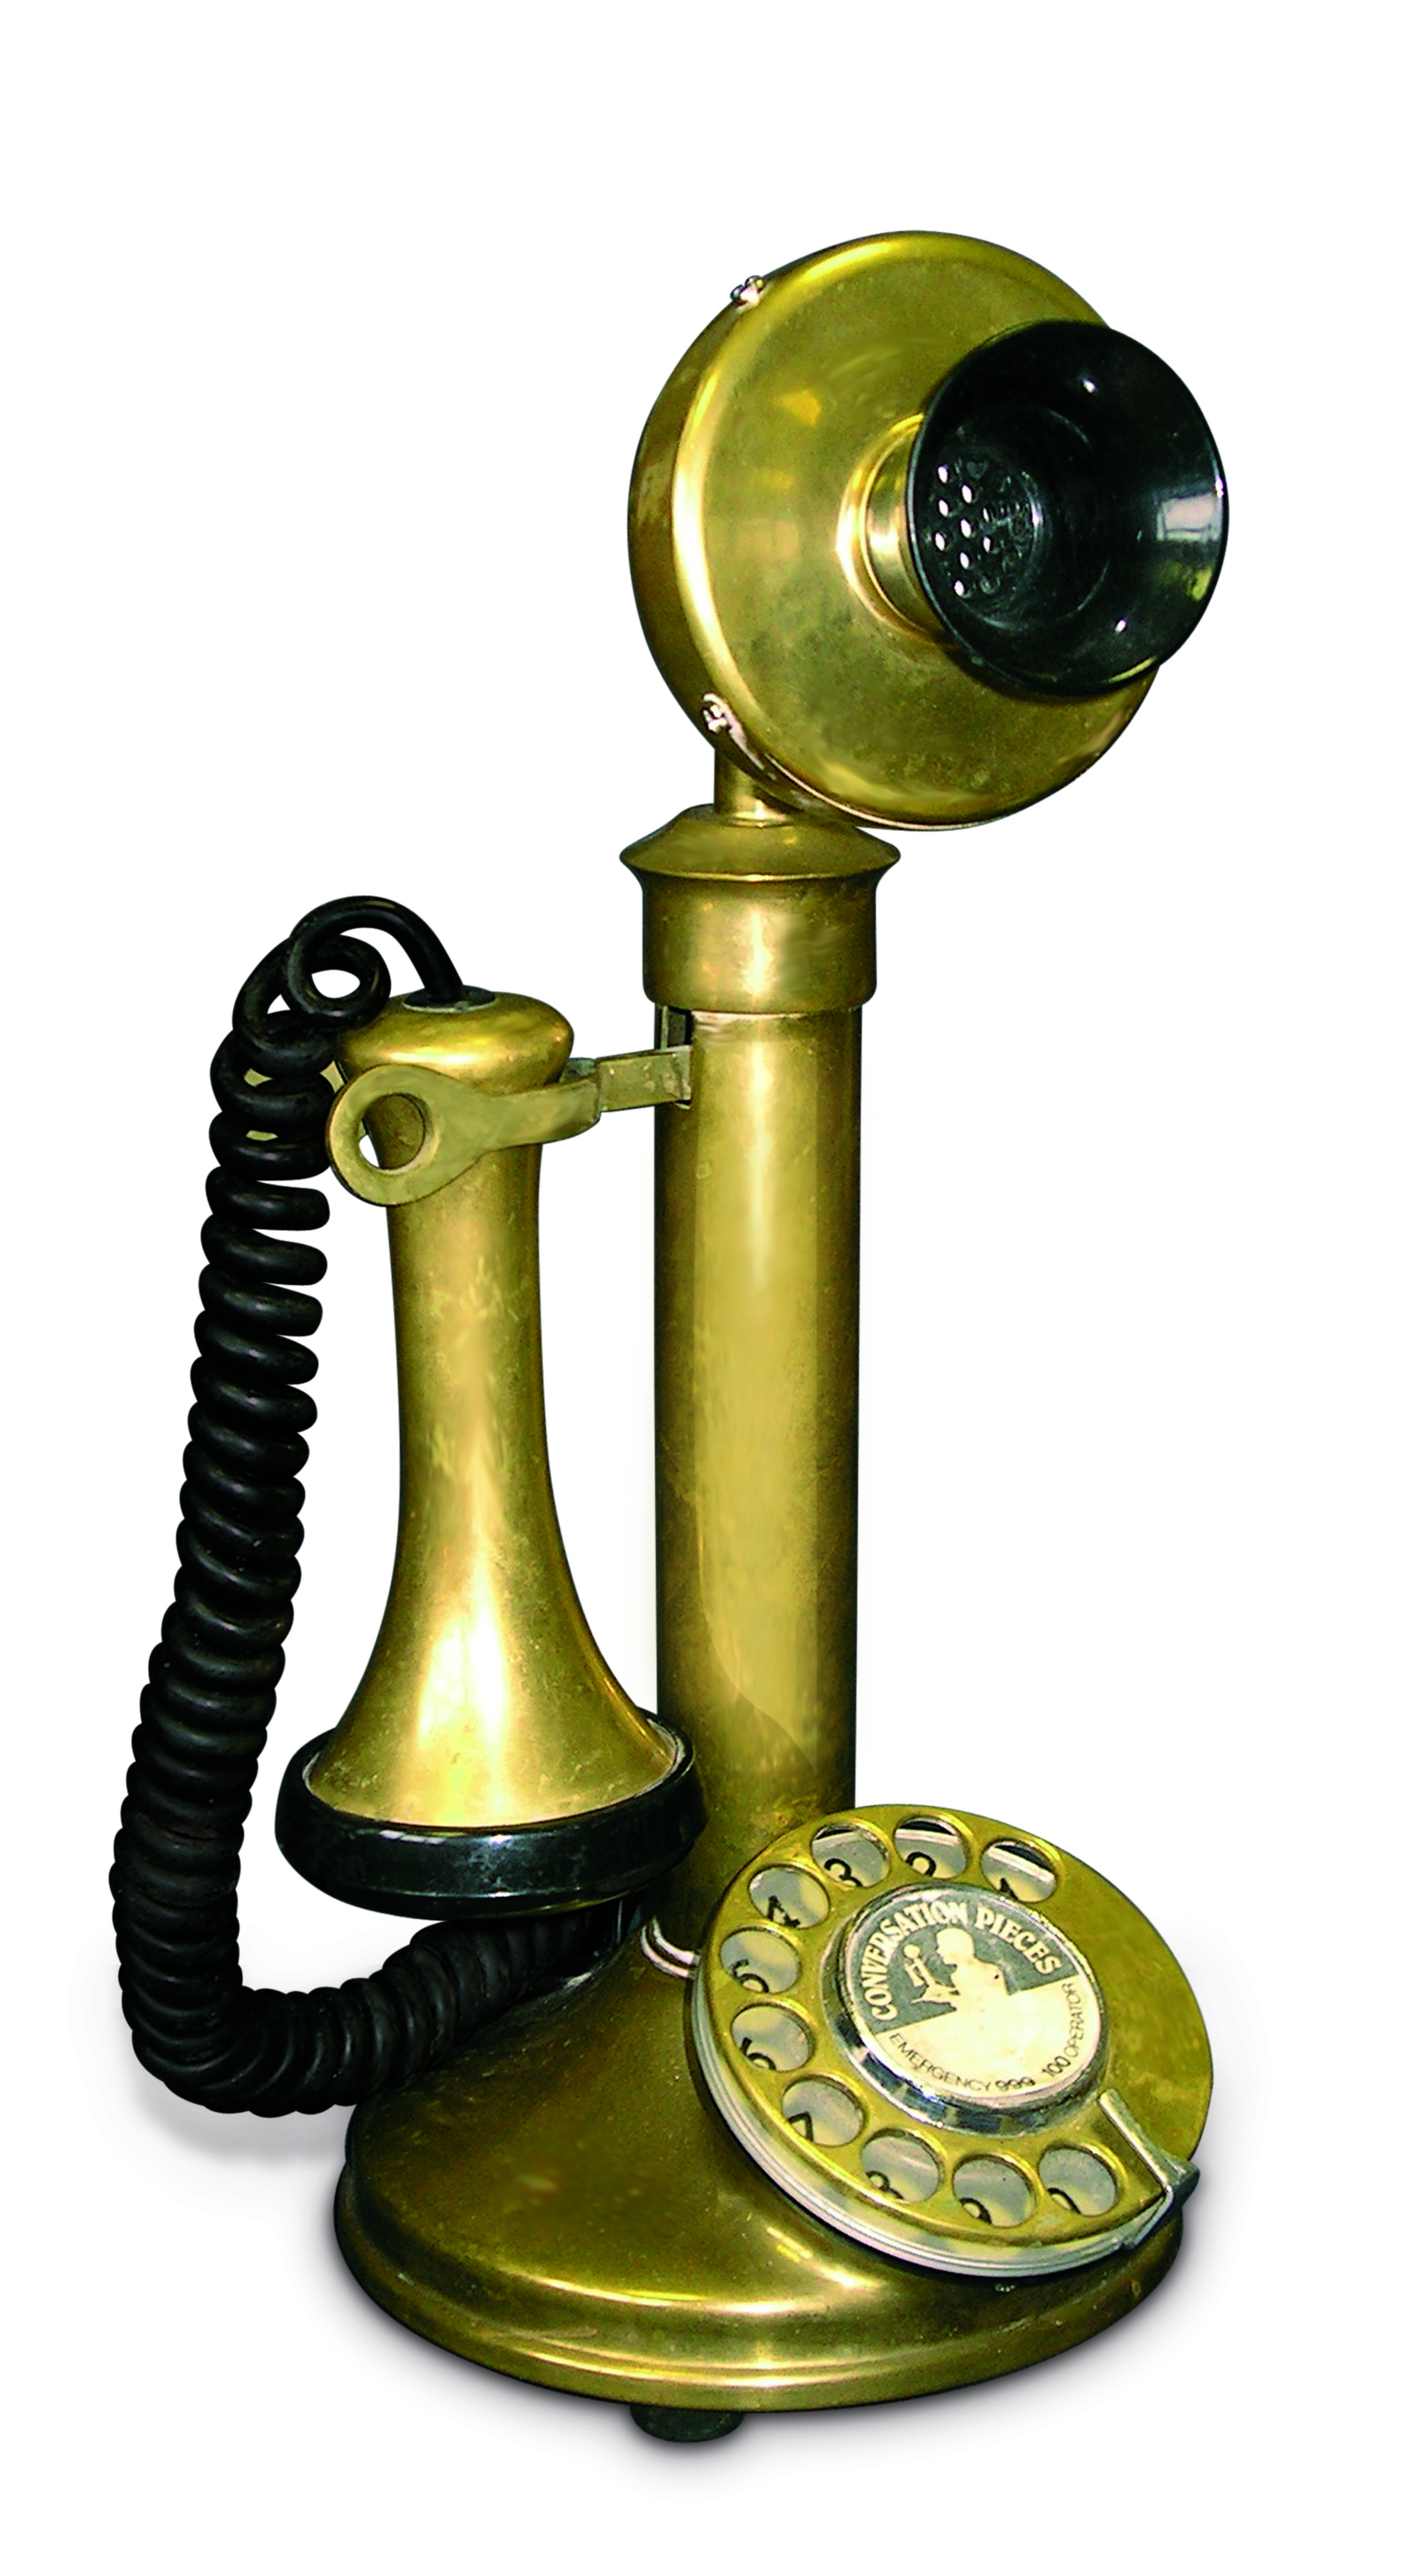 who invented the first telephone